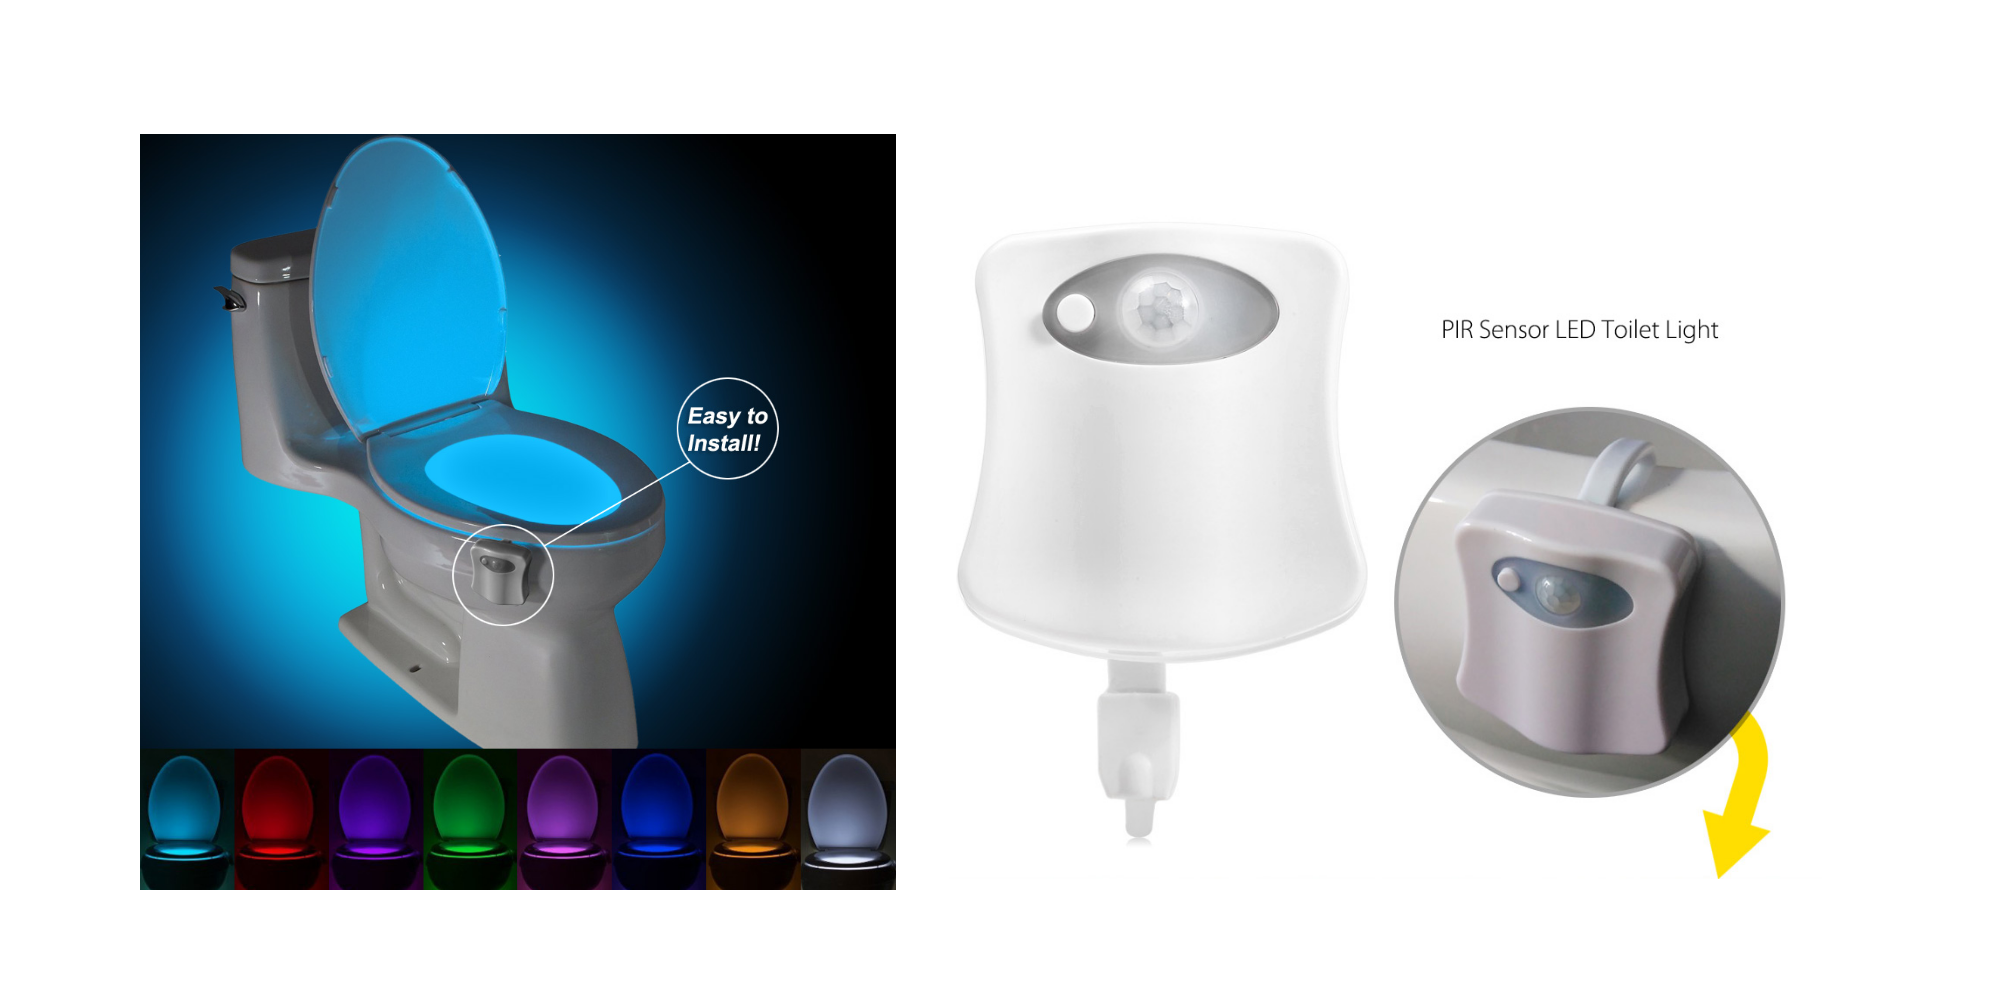 8-color LED Toilet Light / Bathroom Night Light Only $2.99!! First 60 ONLY!!